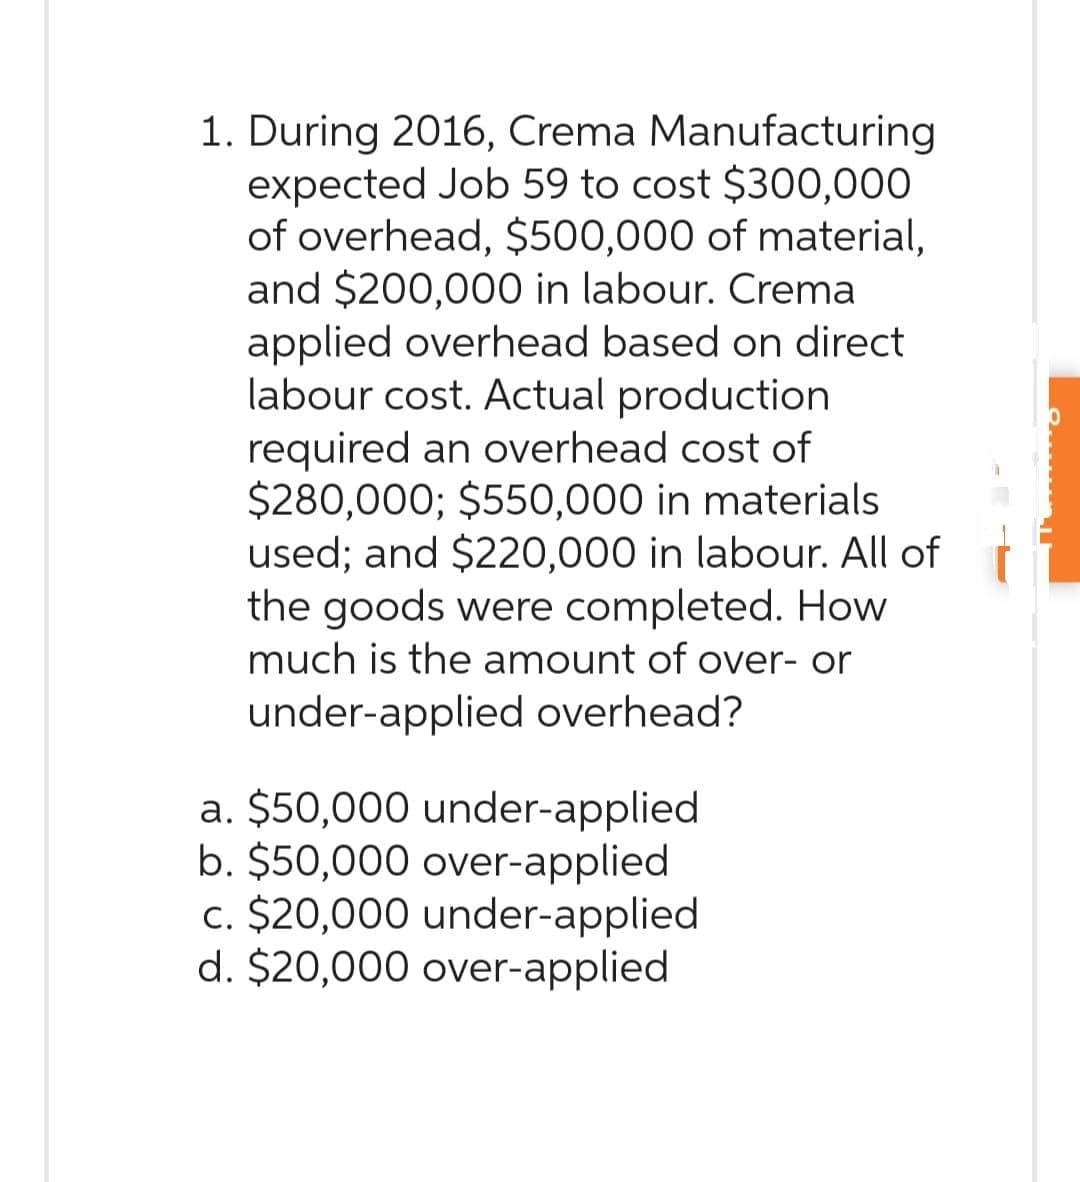 1. During 2016, Crema Manufacturing
expected Job 59 to cost $300,000
of overhead, $500,000 of material,
and $200,000 in labour. Crema
applied overhead based on direct
labour cost. Actual production
required an overhead cost of
$280,000; $550,000 in materials
used; and $220,000 in labour. All of
the goods were completed. How
much is the amount of over- or
under-applied overhead?
a. $50,000 under-applied
b. $50,000 over-applied
c. $20,000 under-applied
d. $20,000 over-applied